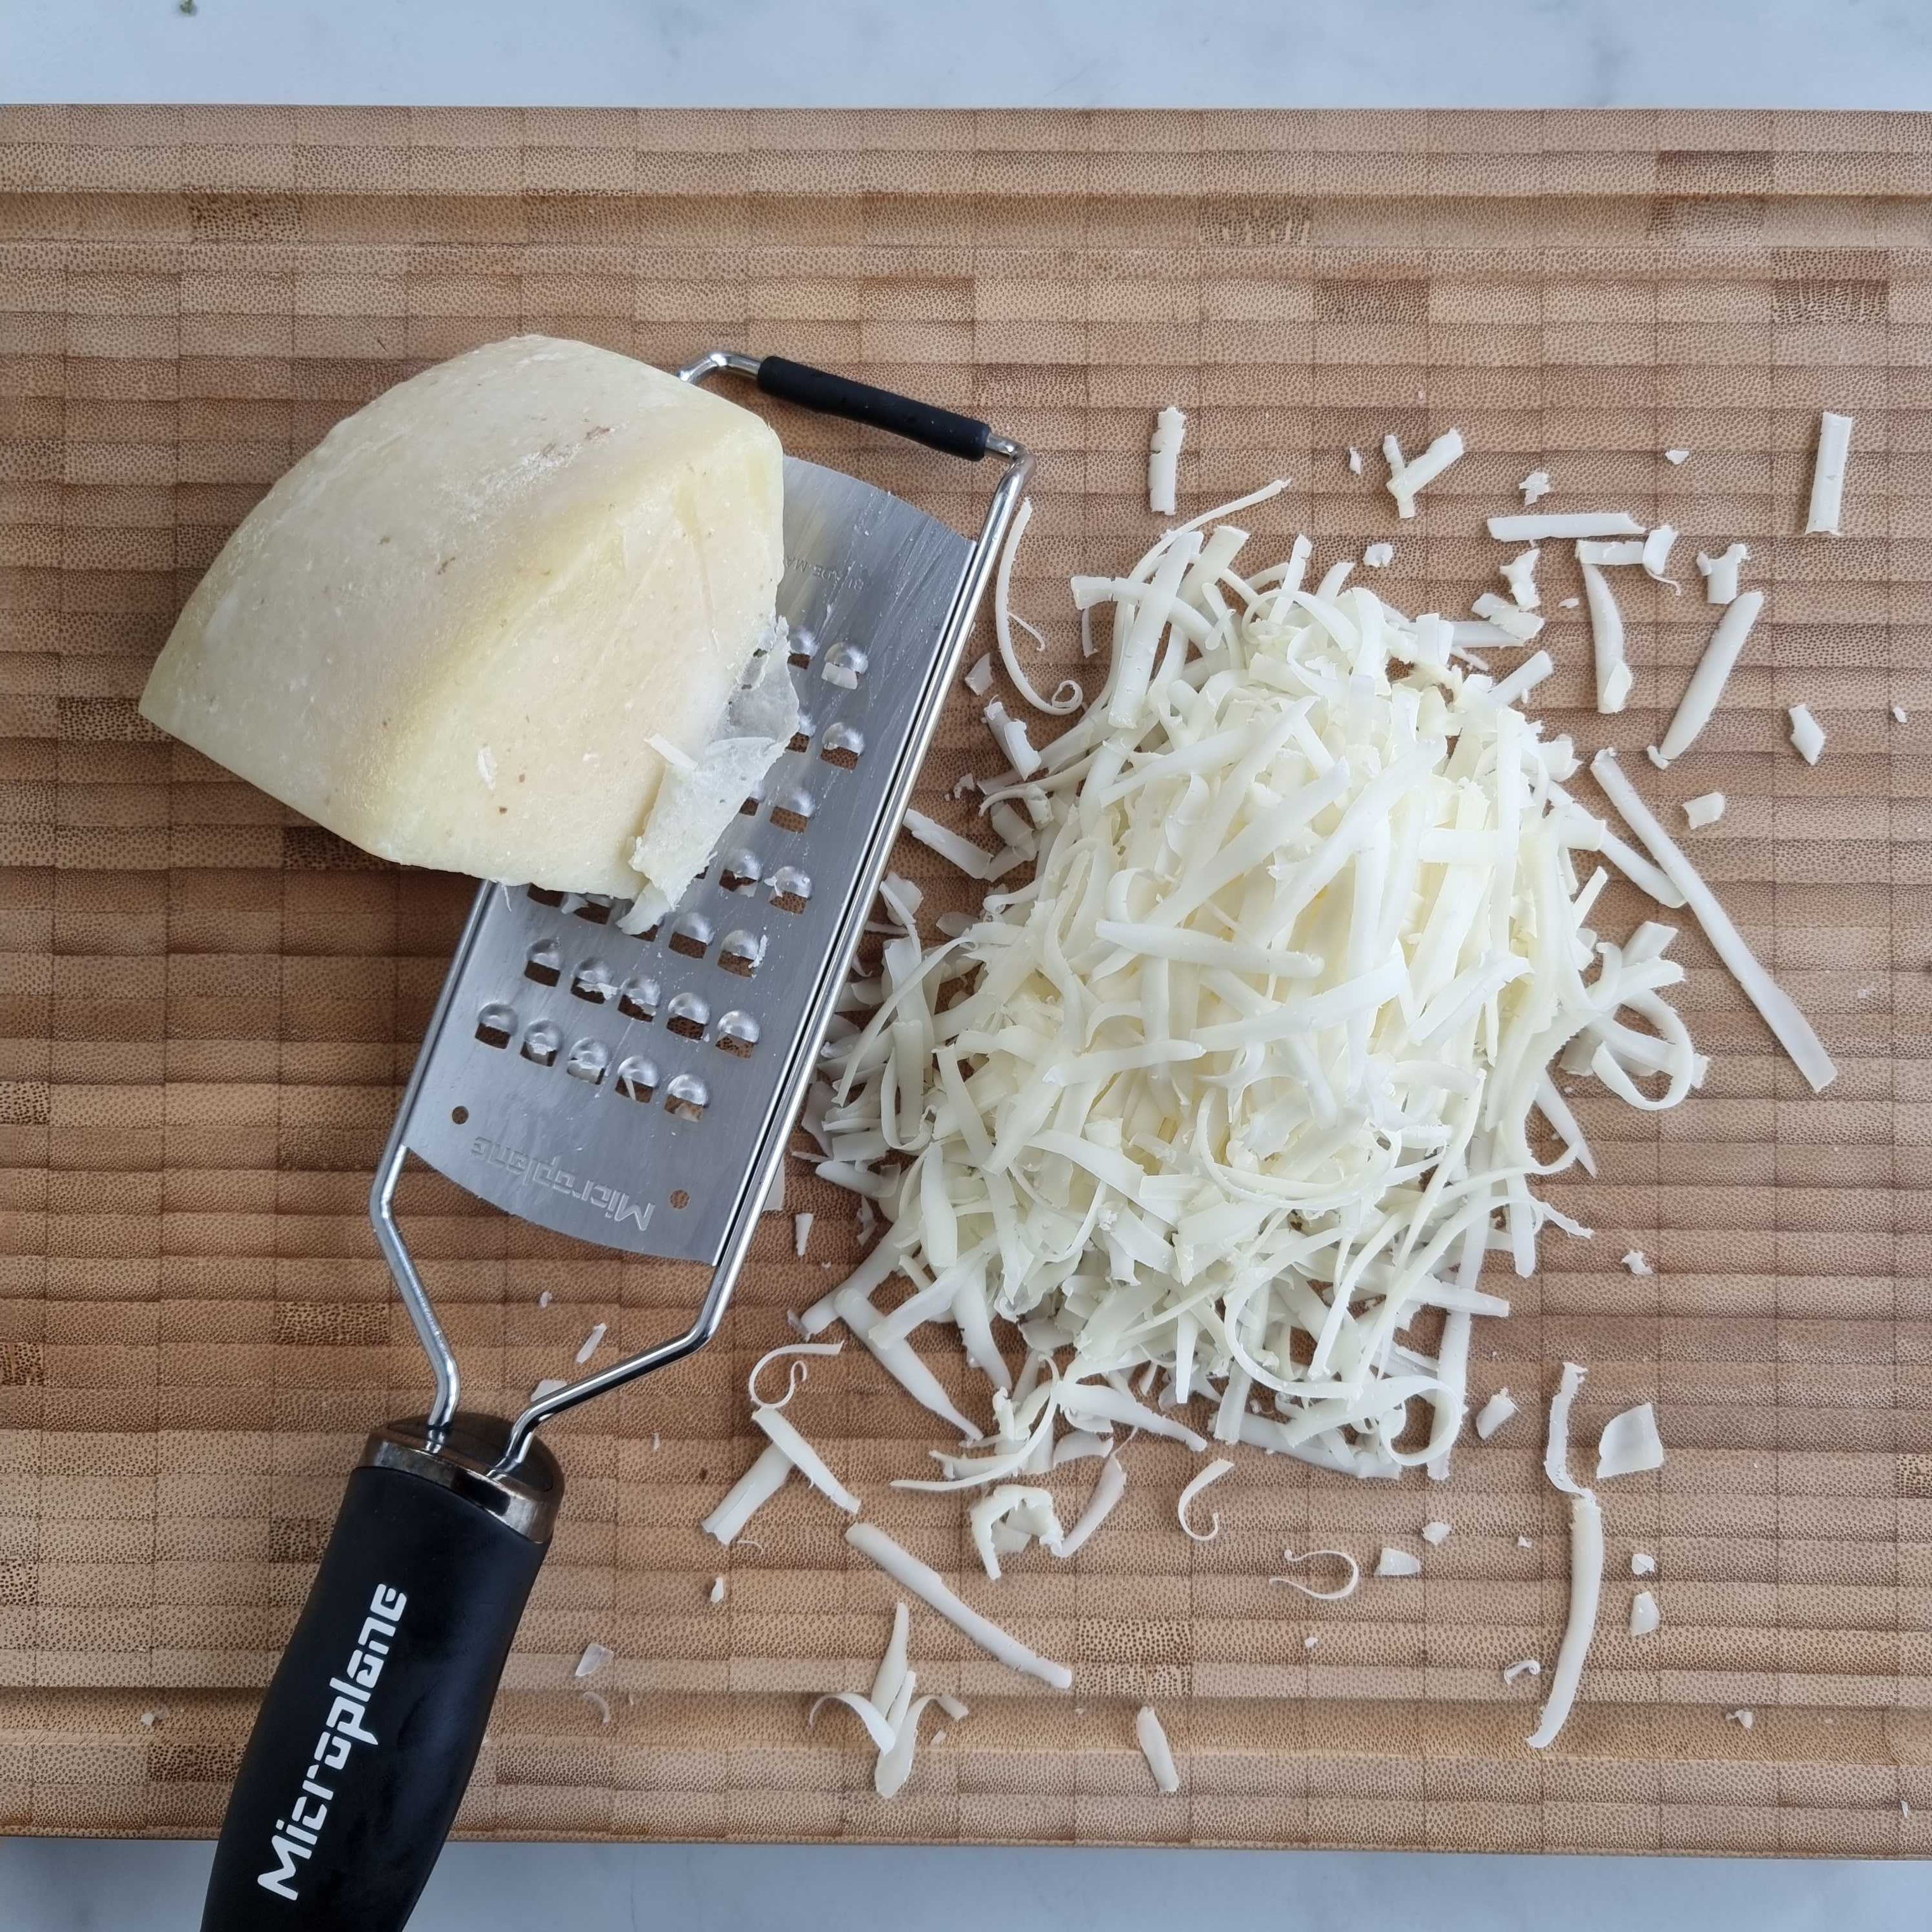 In the meantime, toast the almonds in a small pan. Finely grate the Pecorino cheese. Once they are cool enough to handle, roughly chop the almonds.